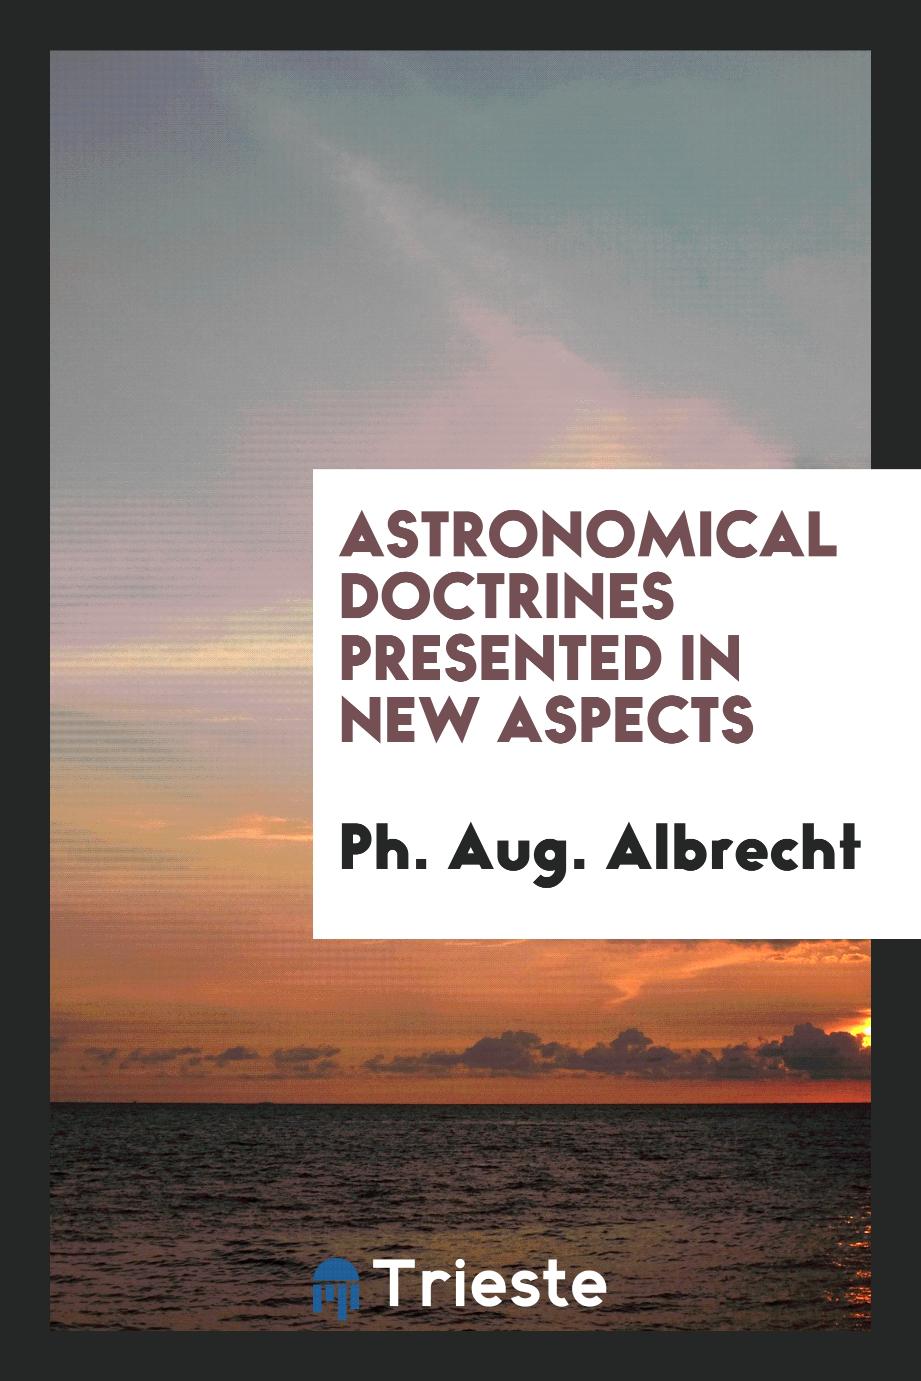 Astronomical doctrines presented in new aspects